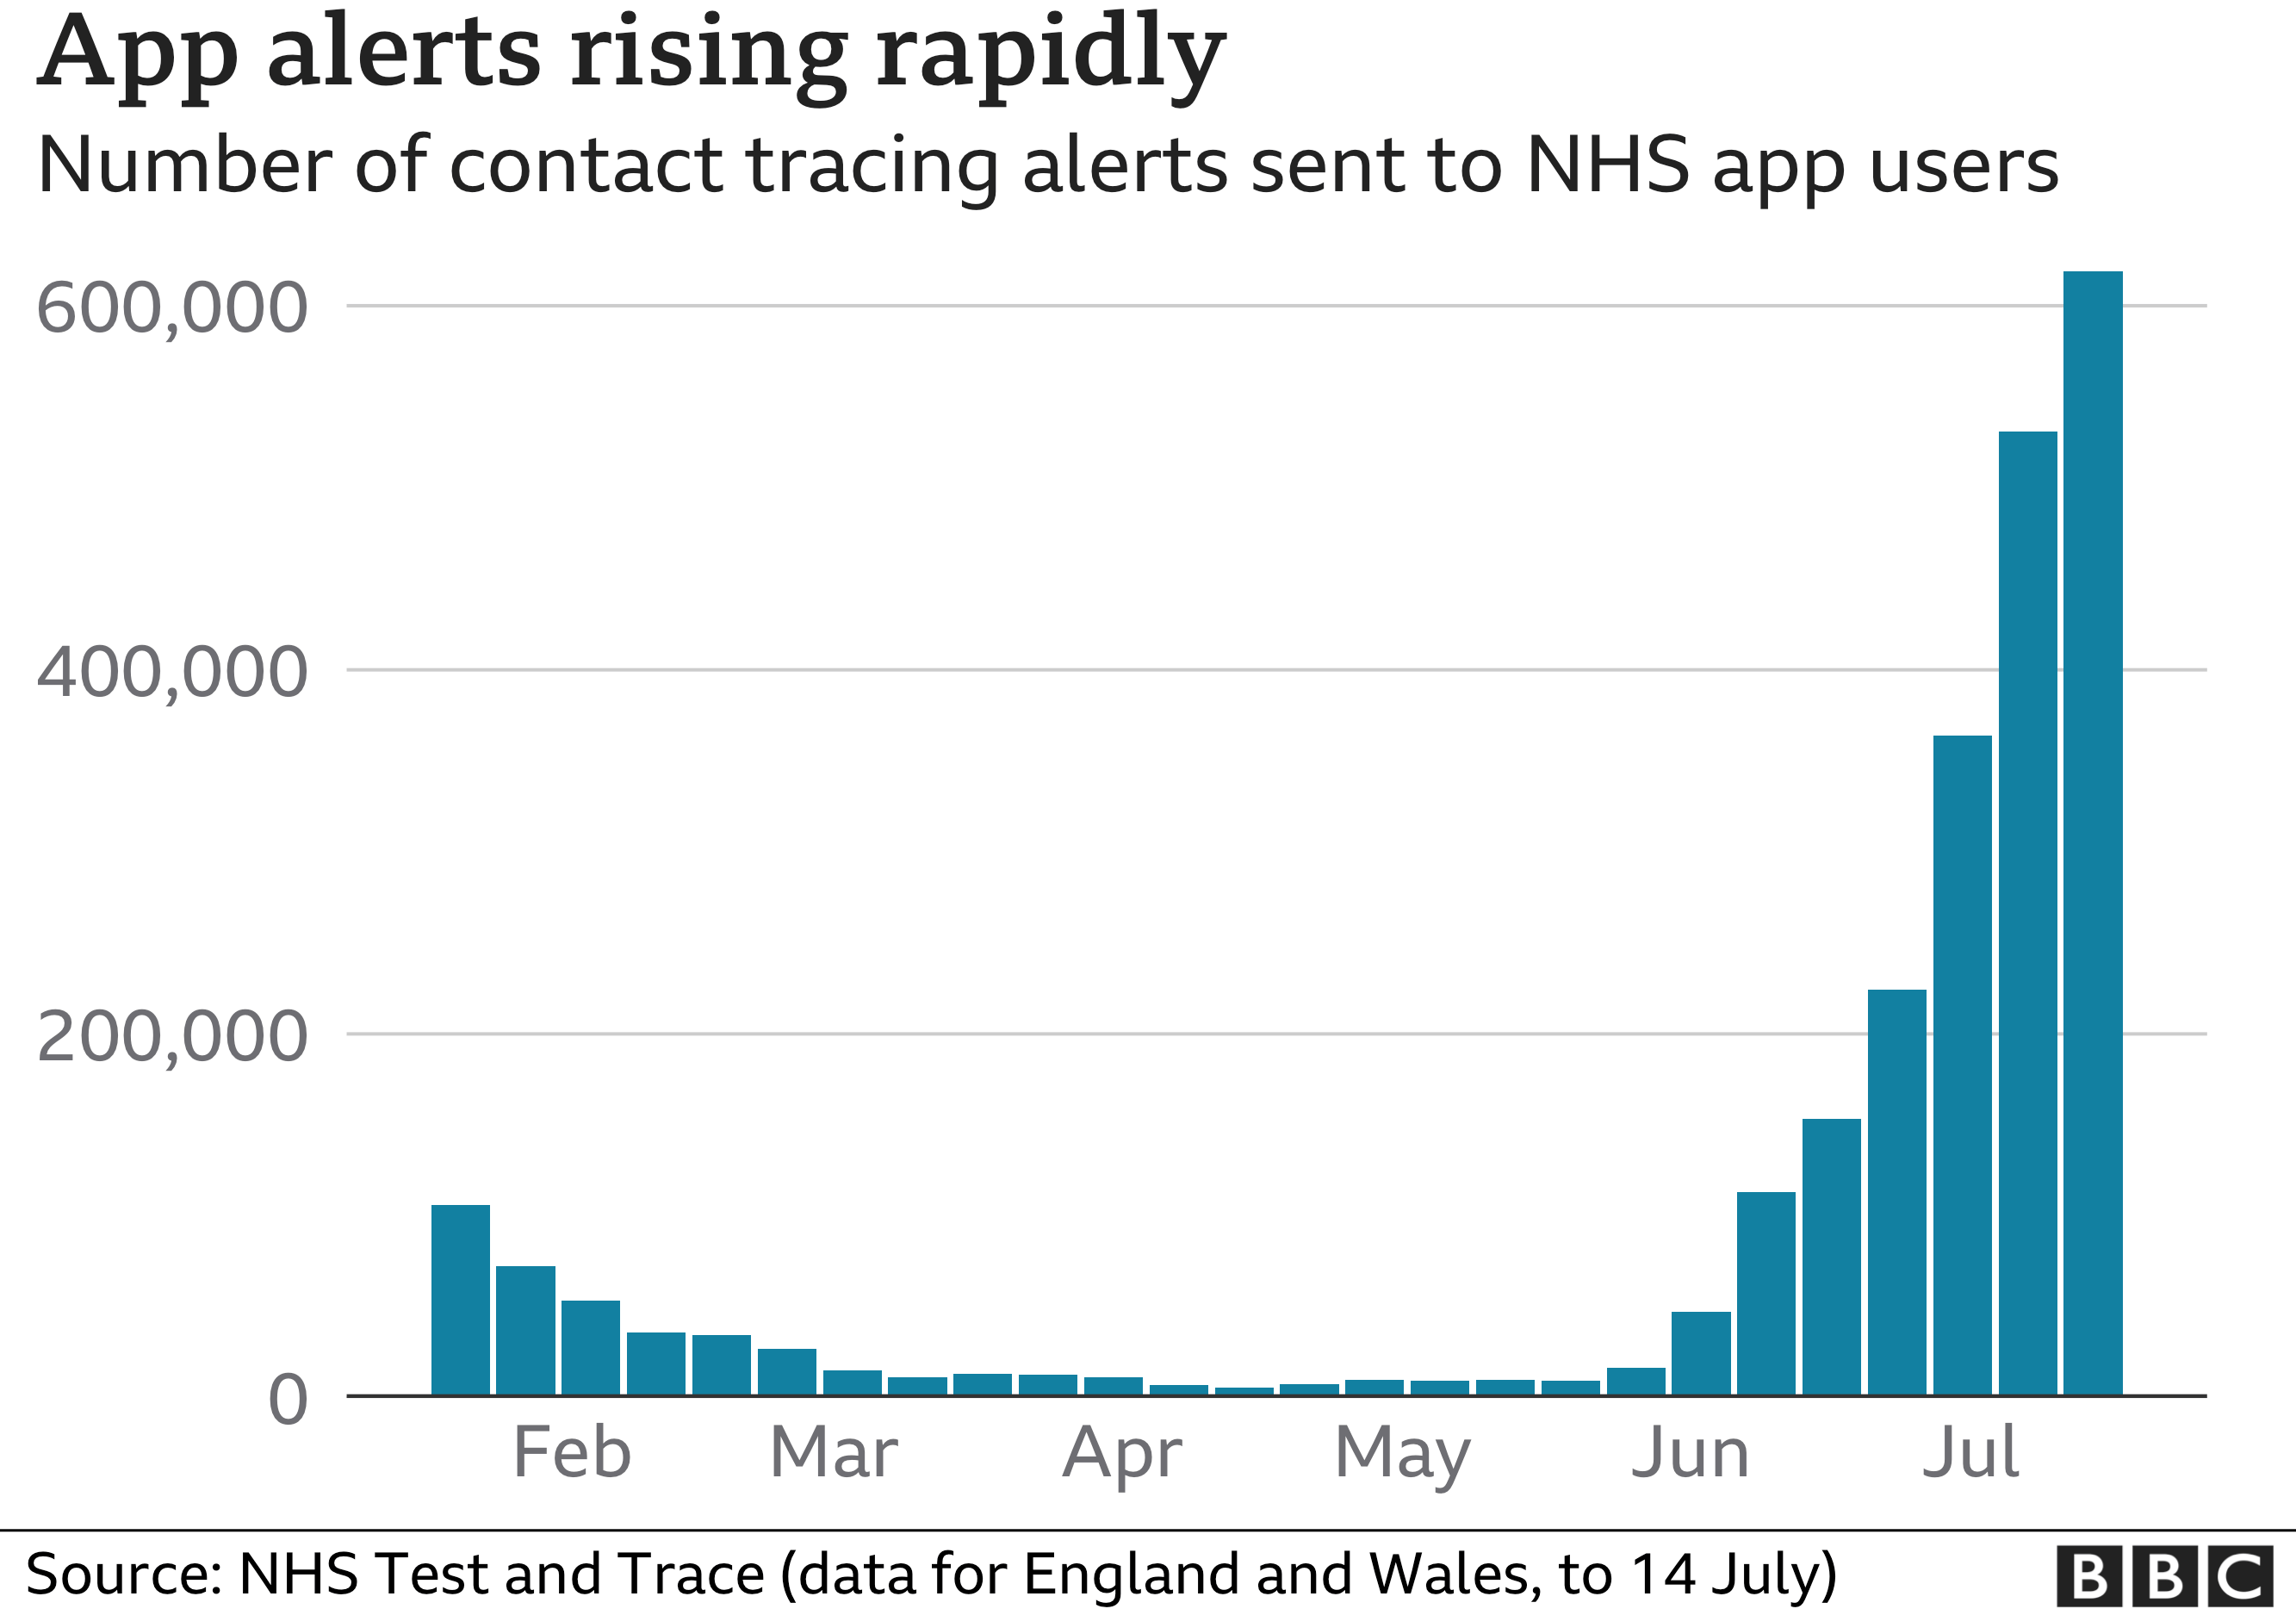 Chart showing rising number of contact tracing alerts sent to NHS app users